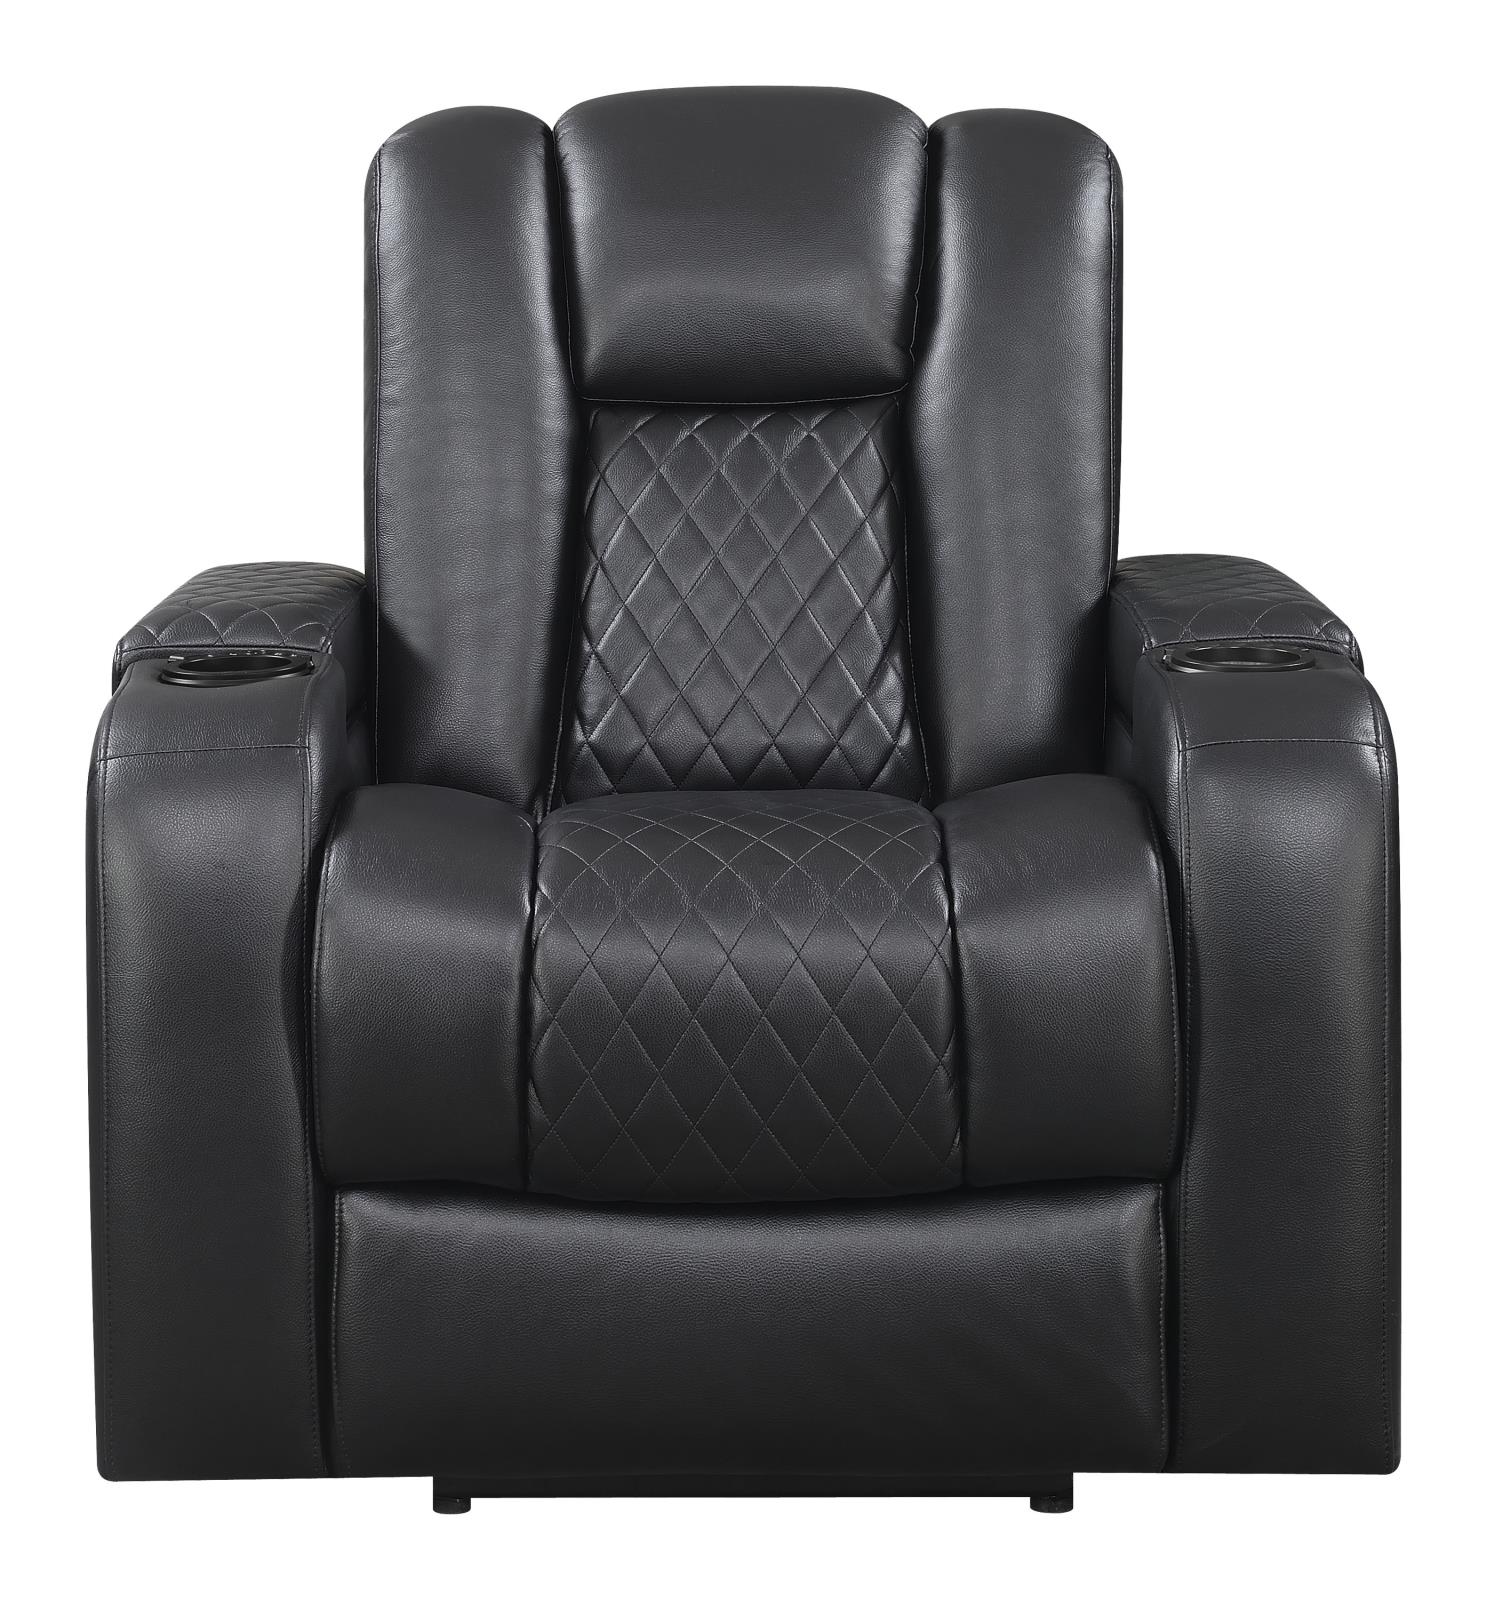 Delangelo Power^2 Recliner with Cup Holders Black - What A Room